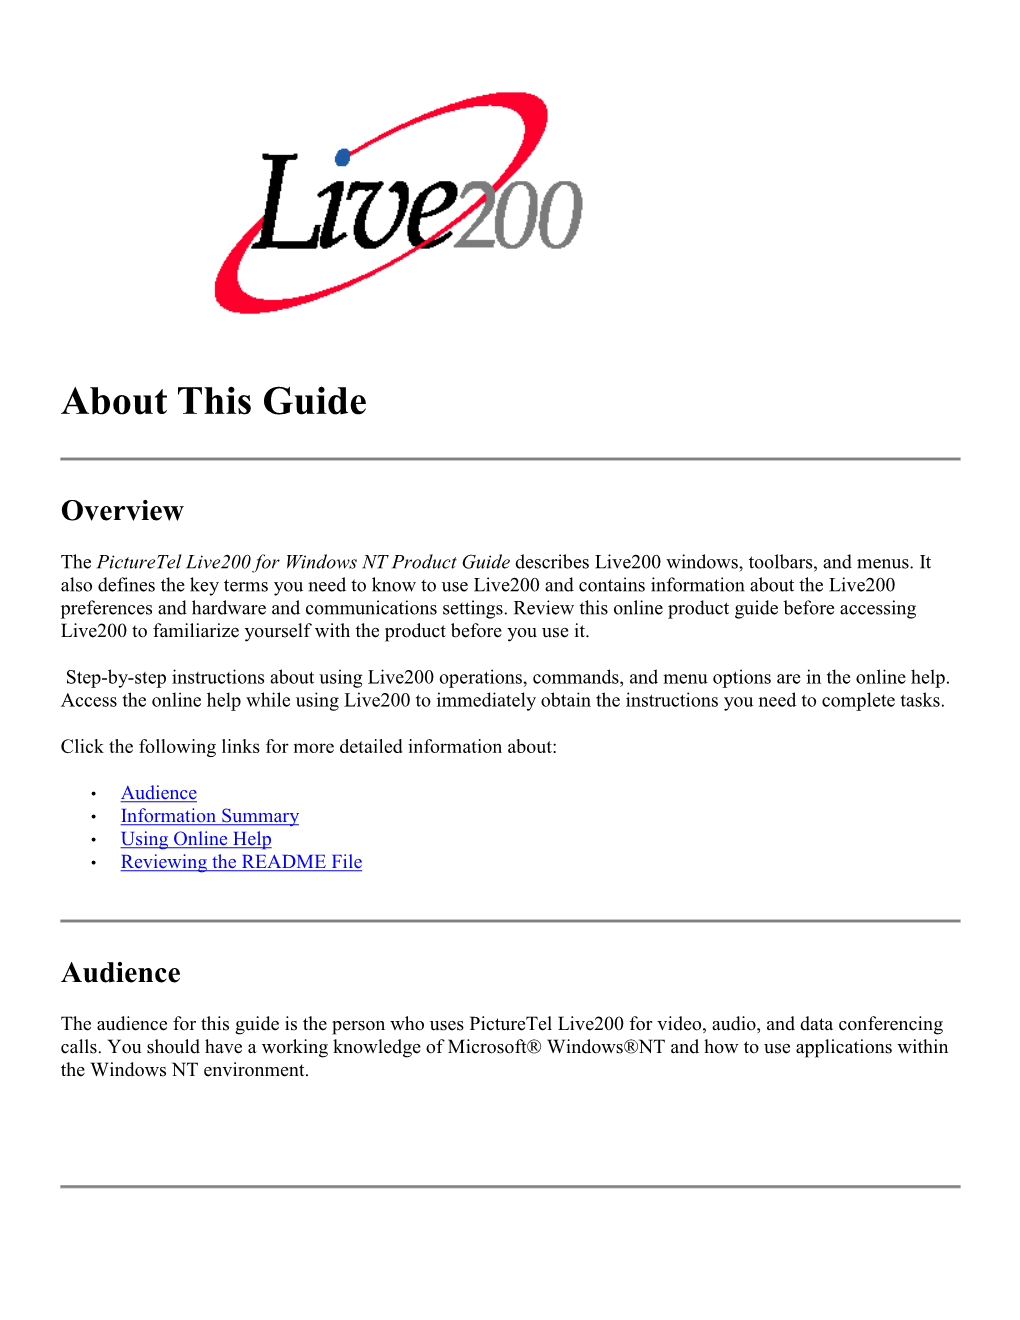 Picturetel Live200 for Windows NT Product Guide Describes Live200 Windows, Toolbars, and Menus